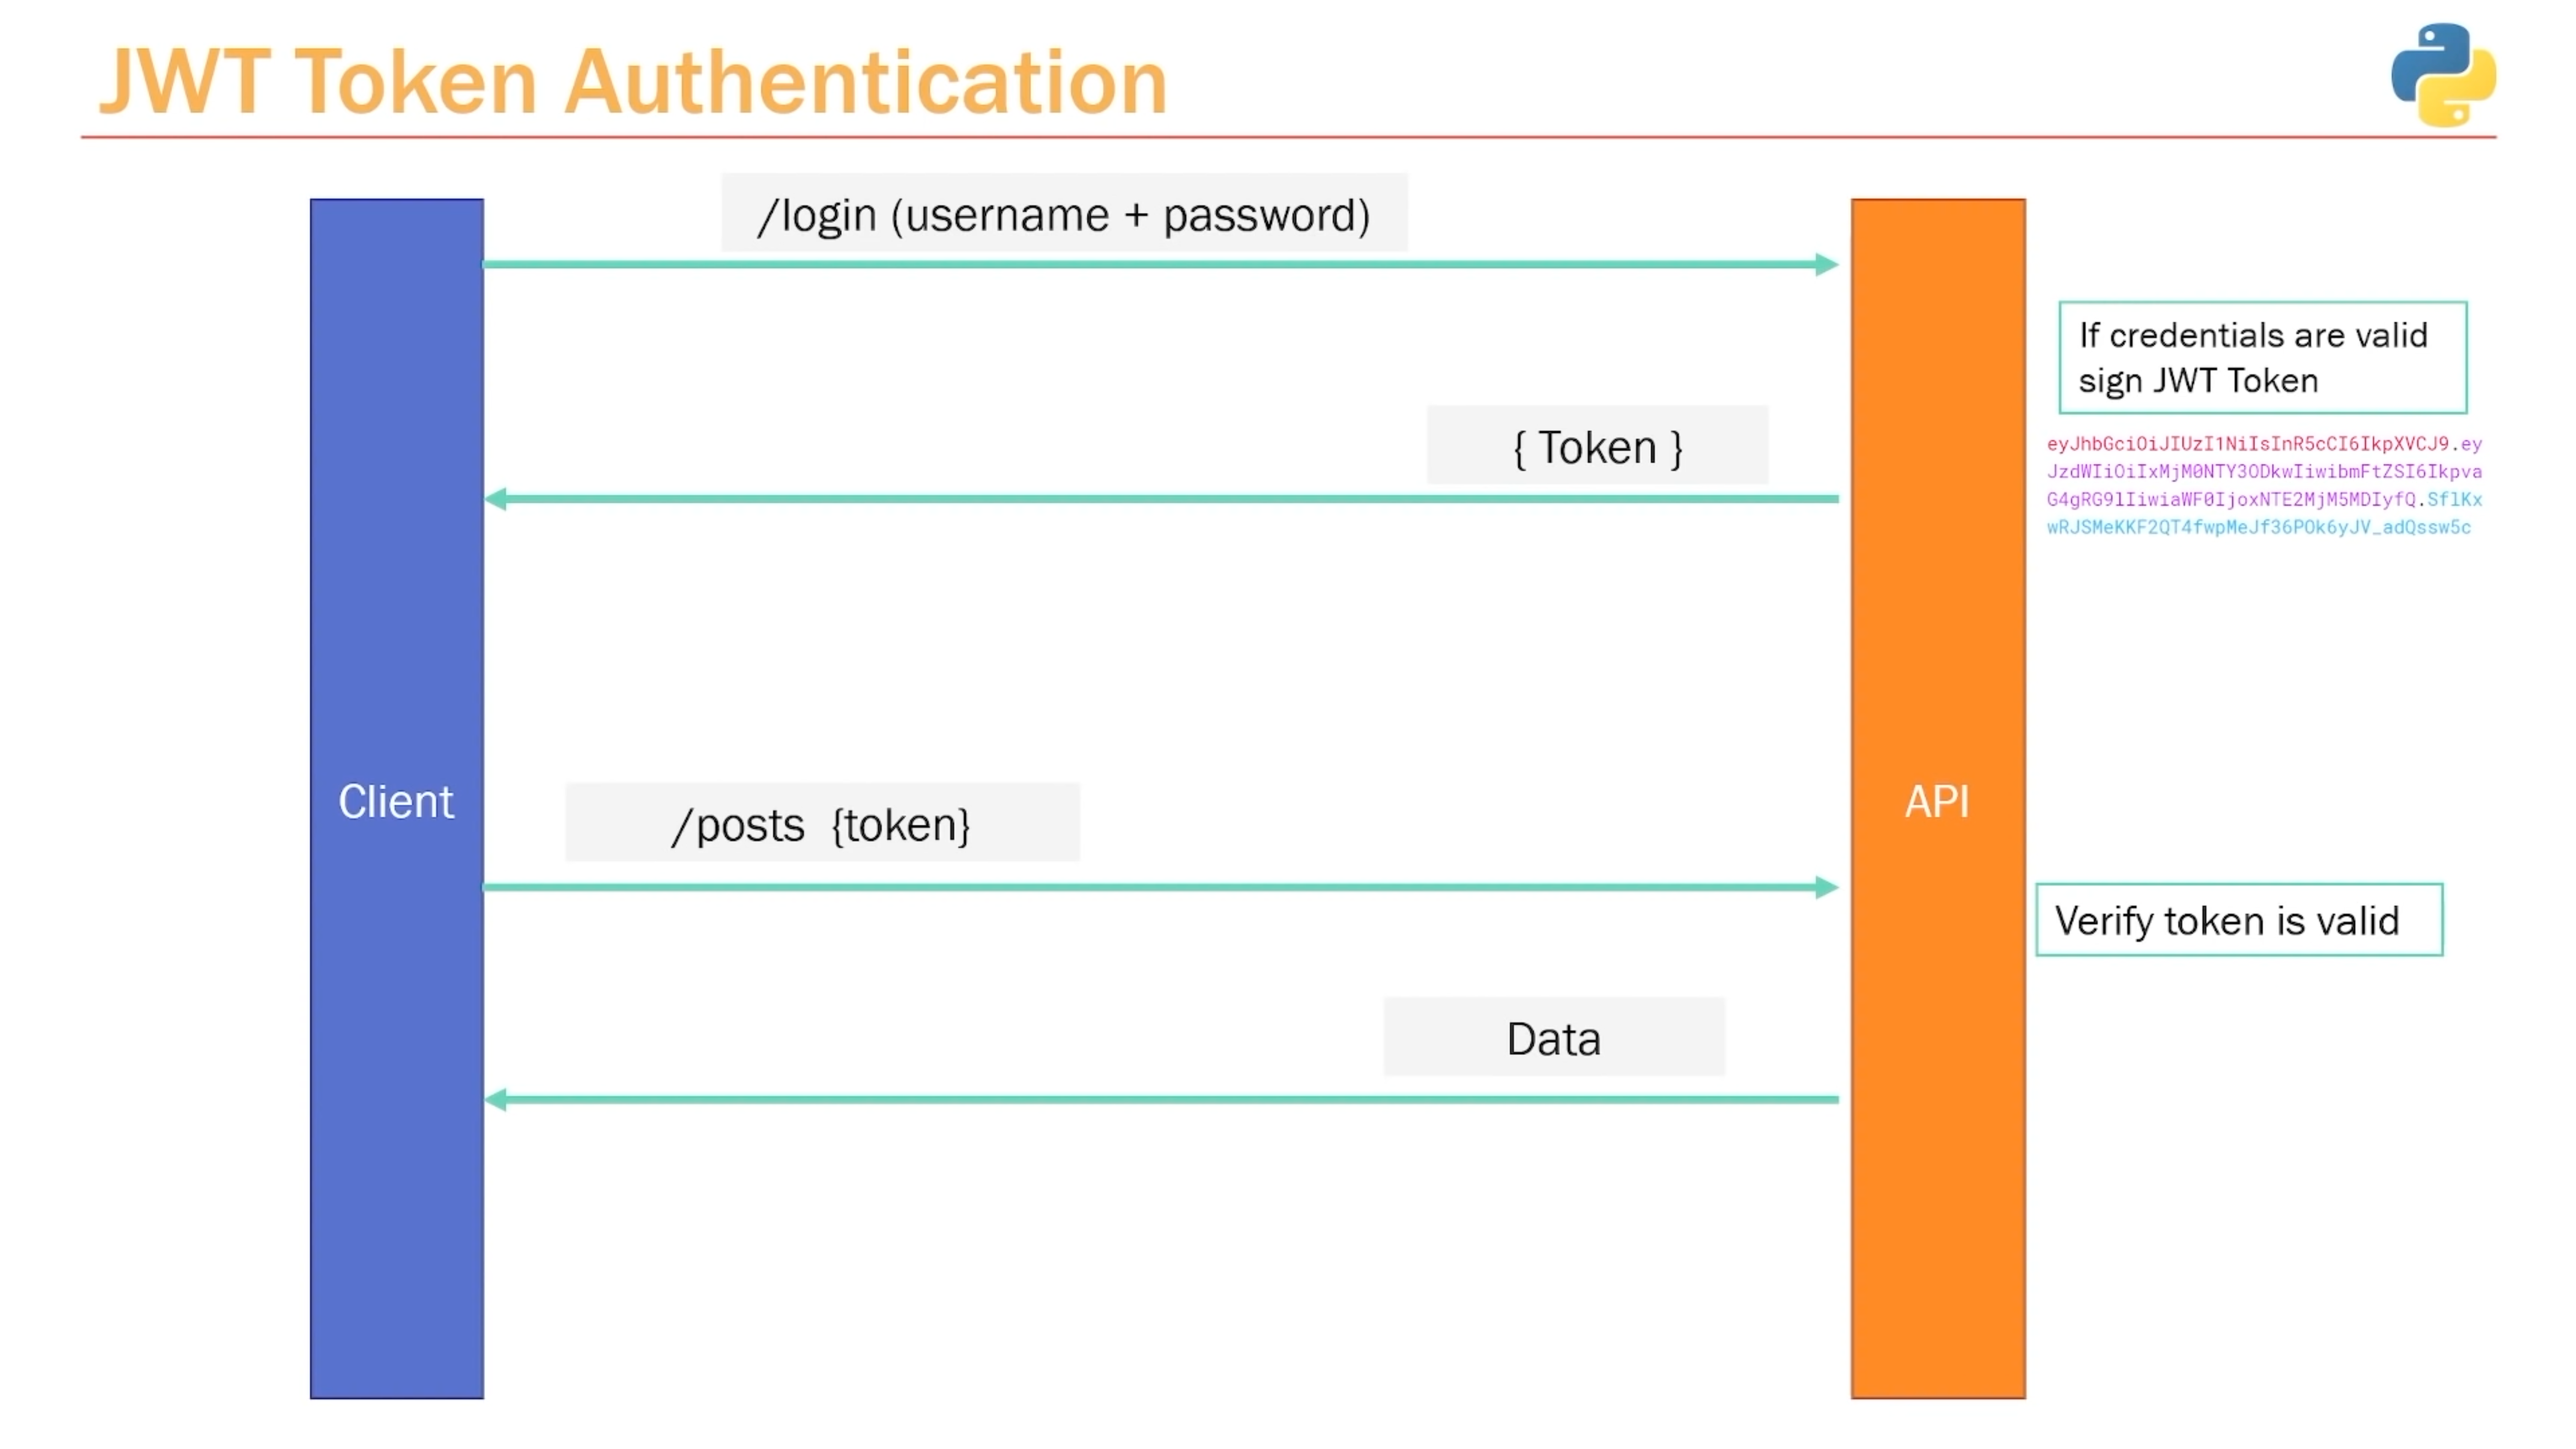 ../../_images/http-oauth2-jwt-sequence.png